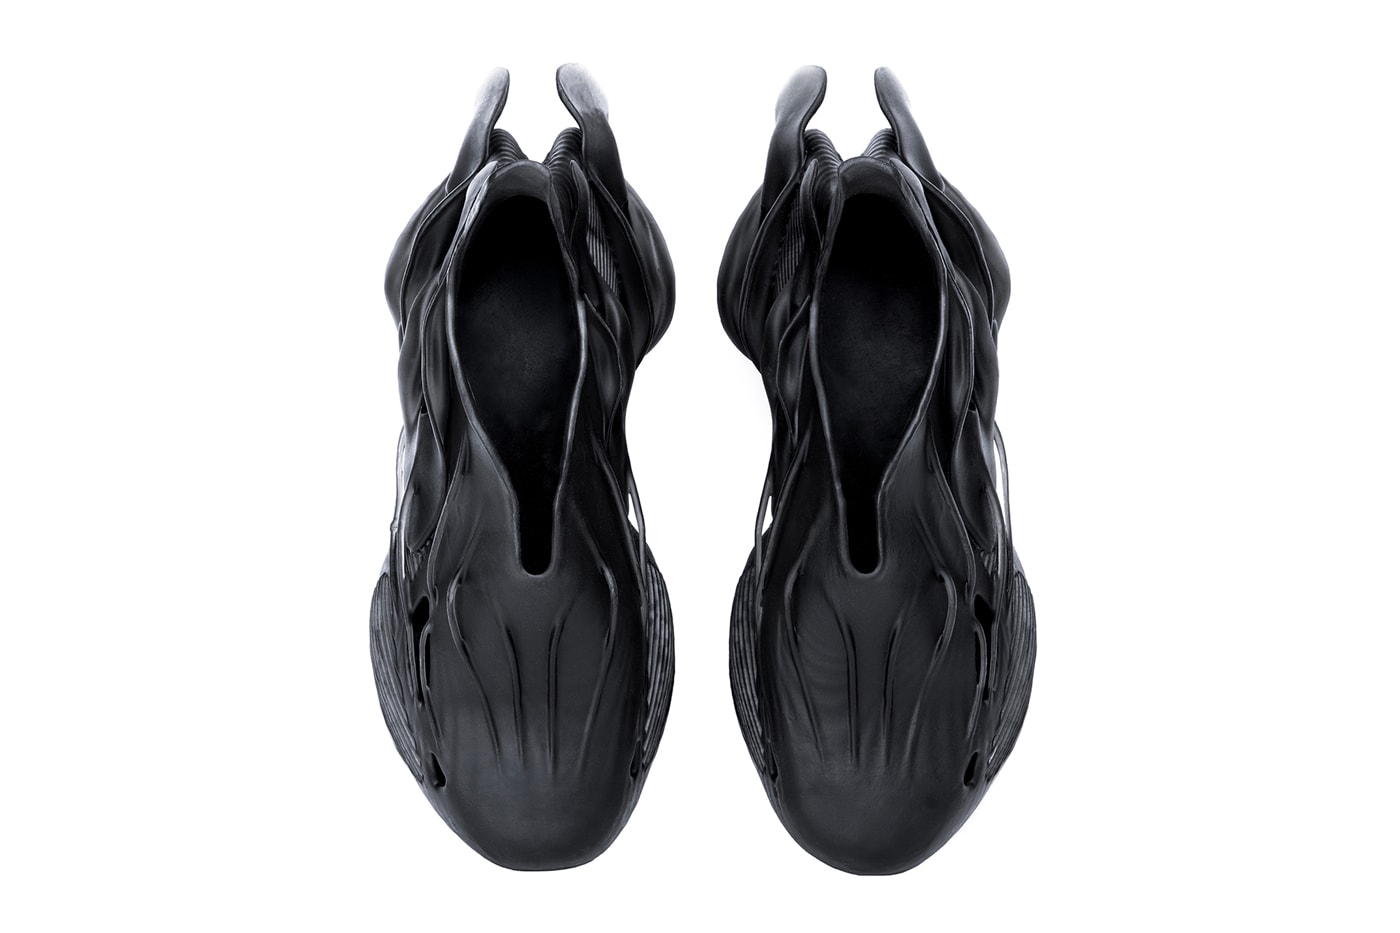 SCRY™️ Shuttle Shadow 3D Printed Shoe First Look Info Digital Embryo